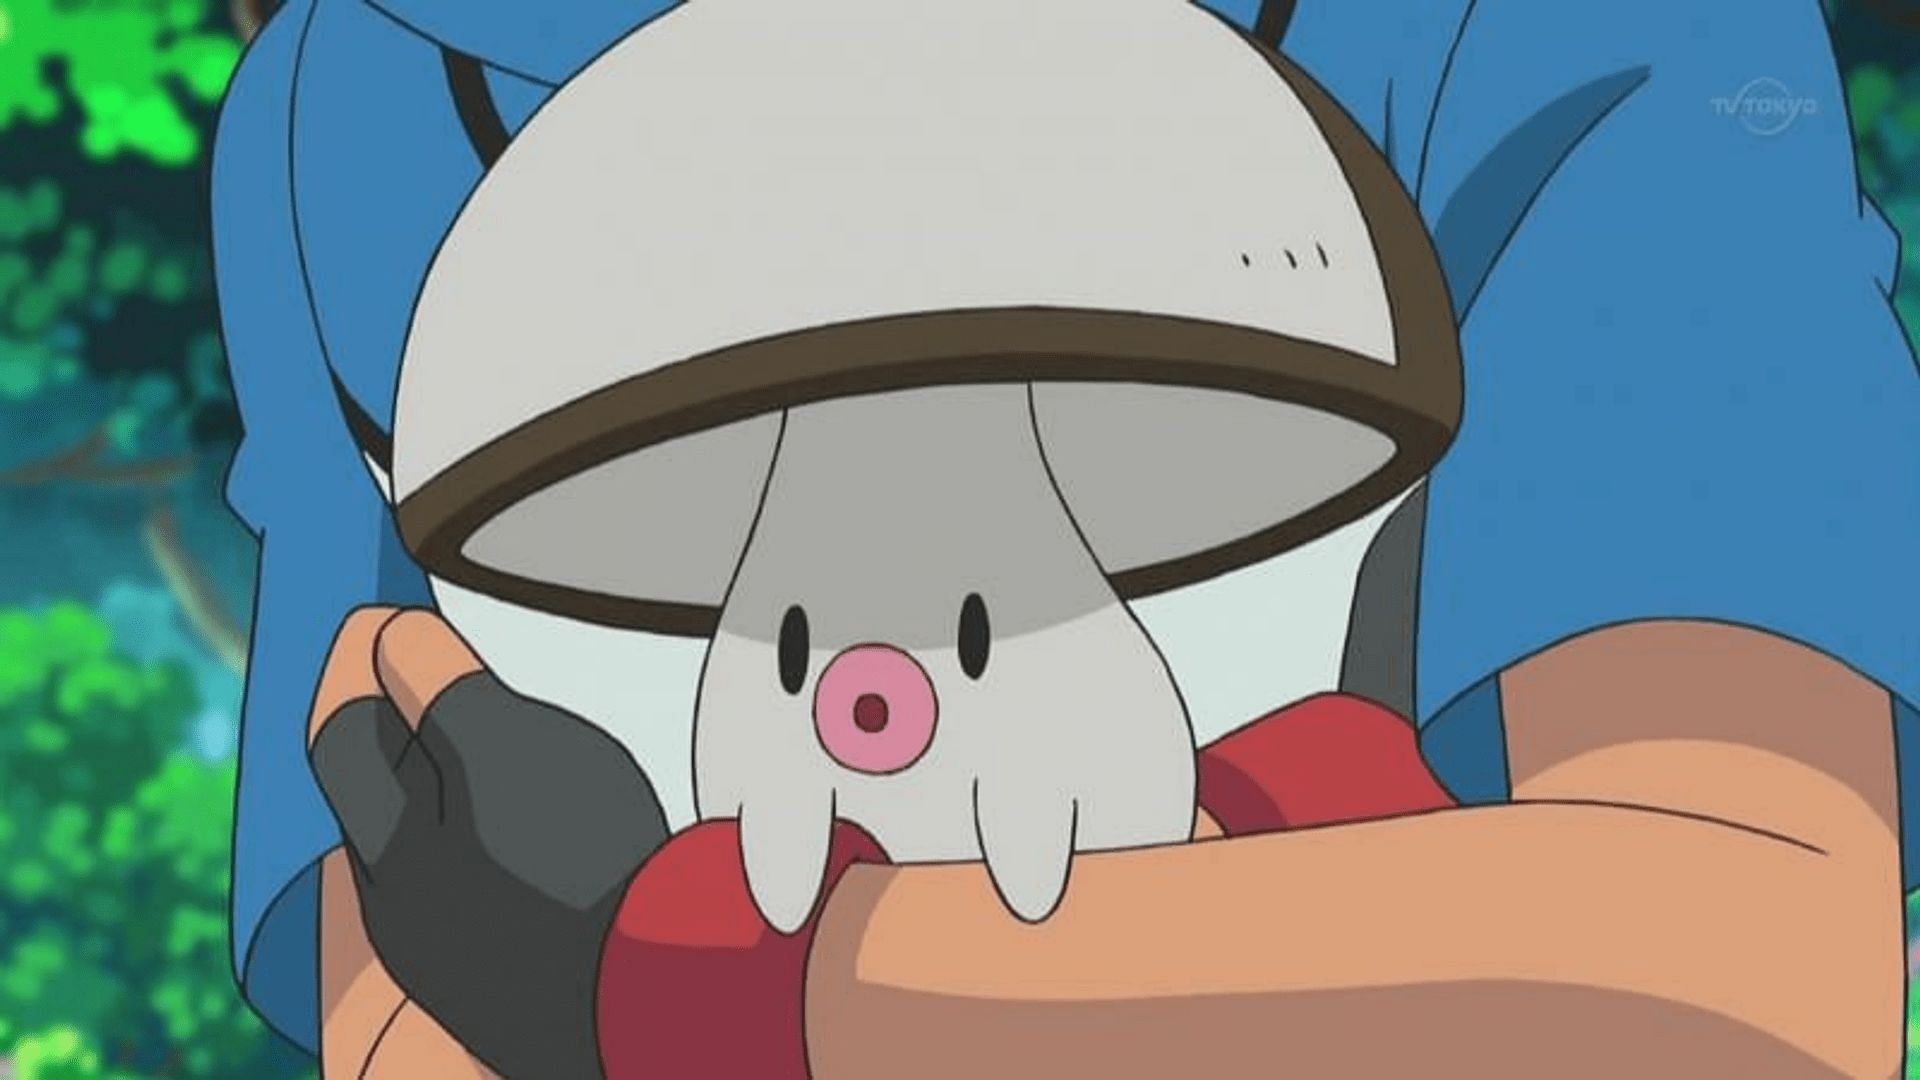 Foongus as it appears in the anime (Image via The Pokemon Company)